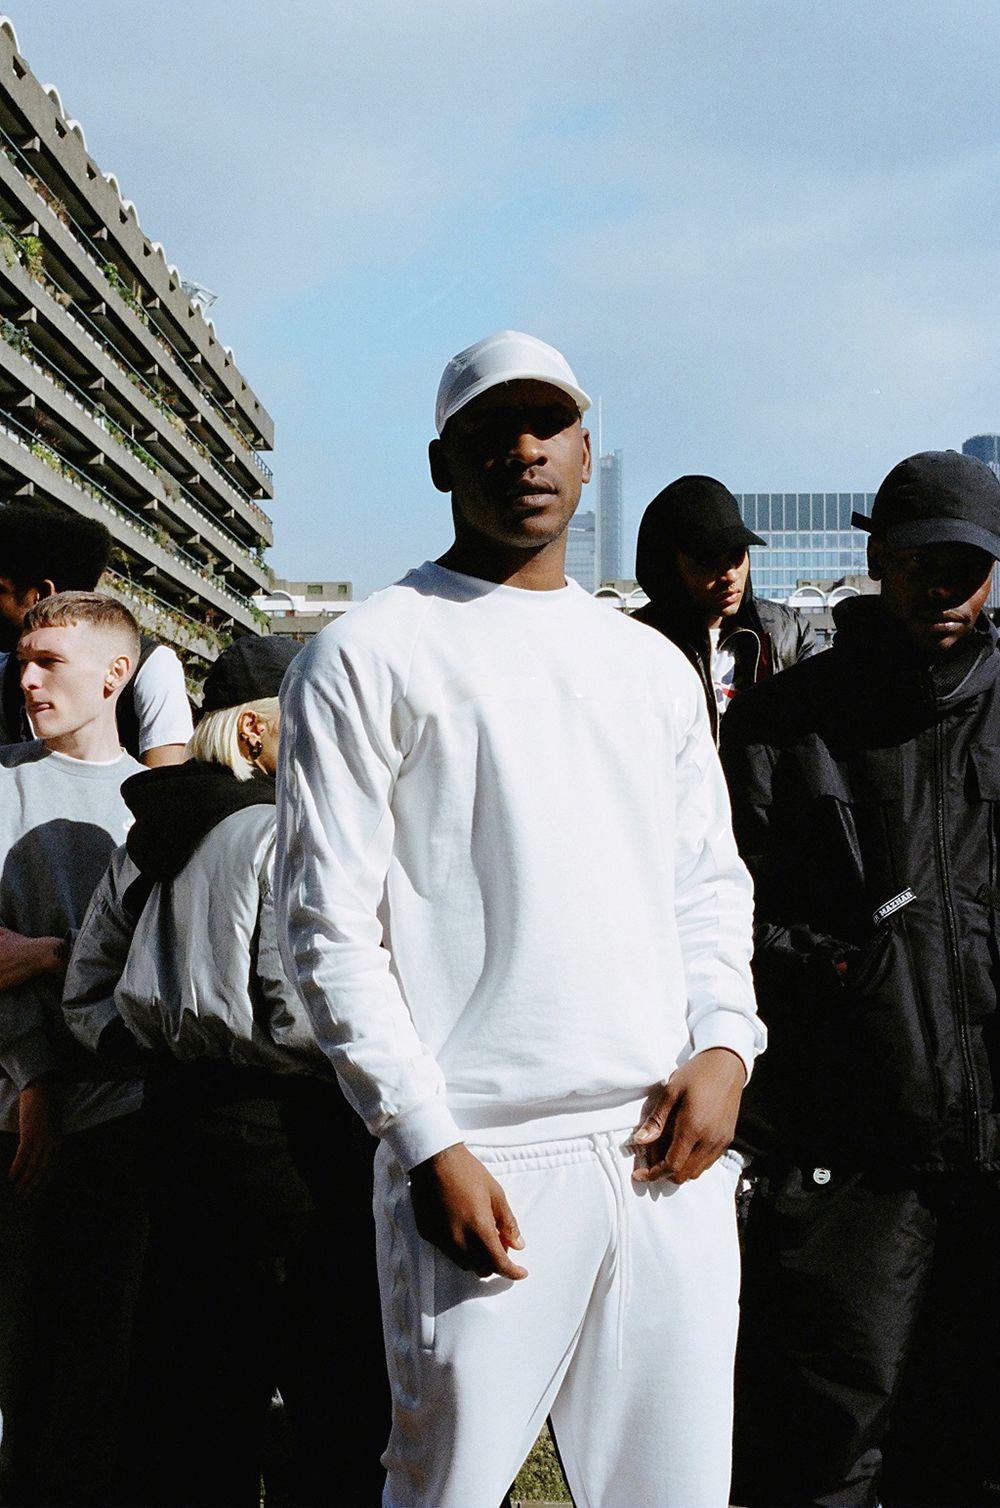 Skepta is a Grime artist and one off the main members